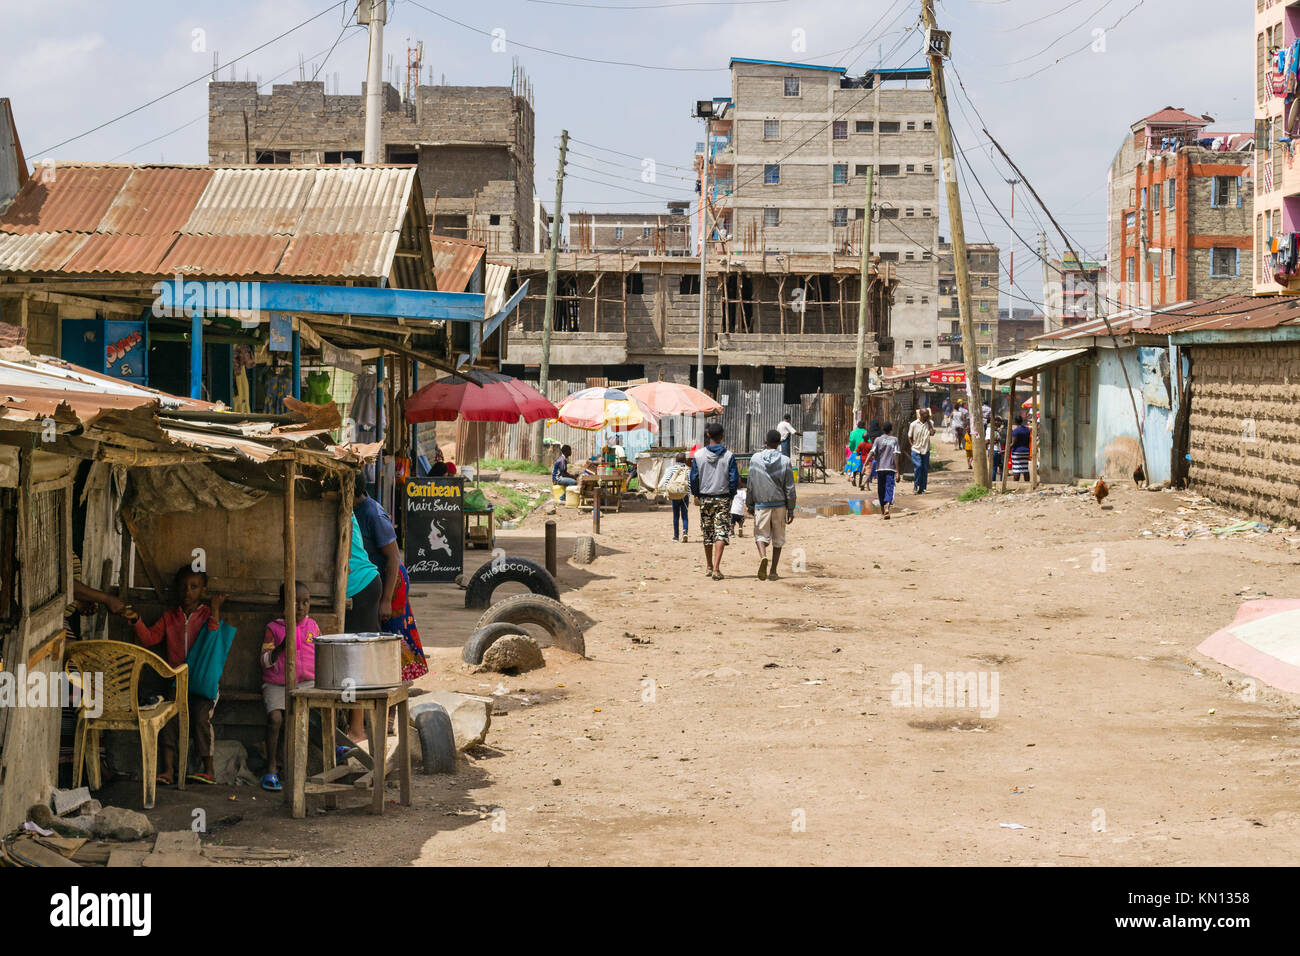 A view of part of the Huruma area of Nairobi with people going about ...